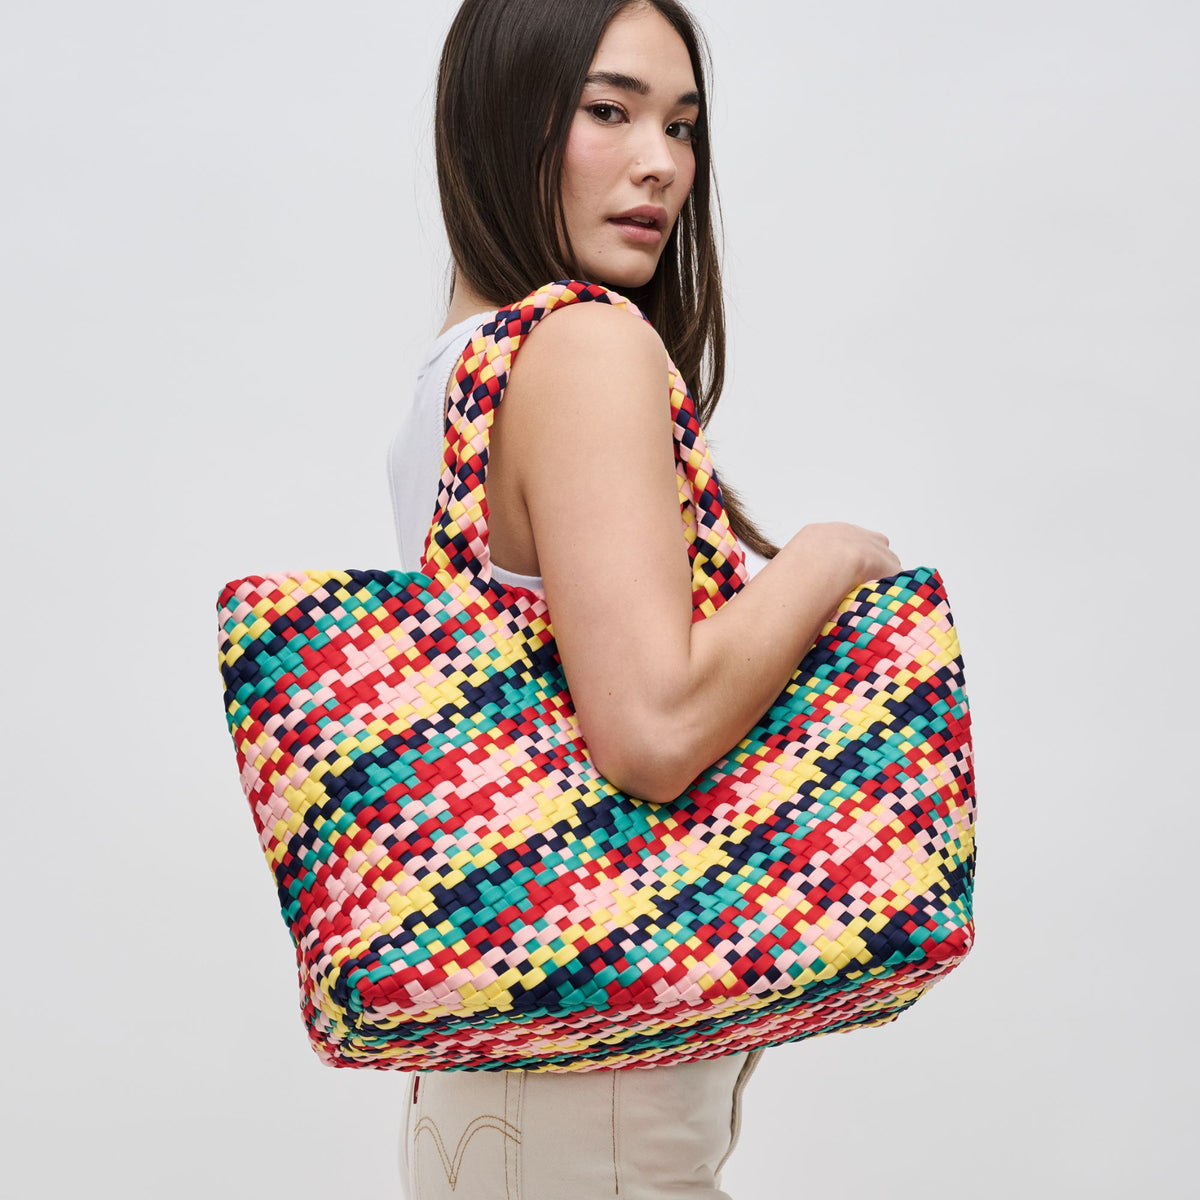 Woman wearing Candy Sol and Selene Sky's The Limit - Large Tote 841764109321 View 3 | Candy